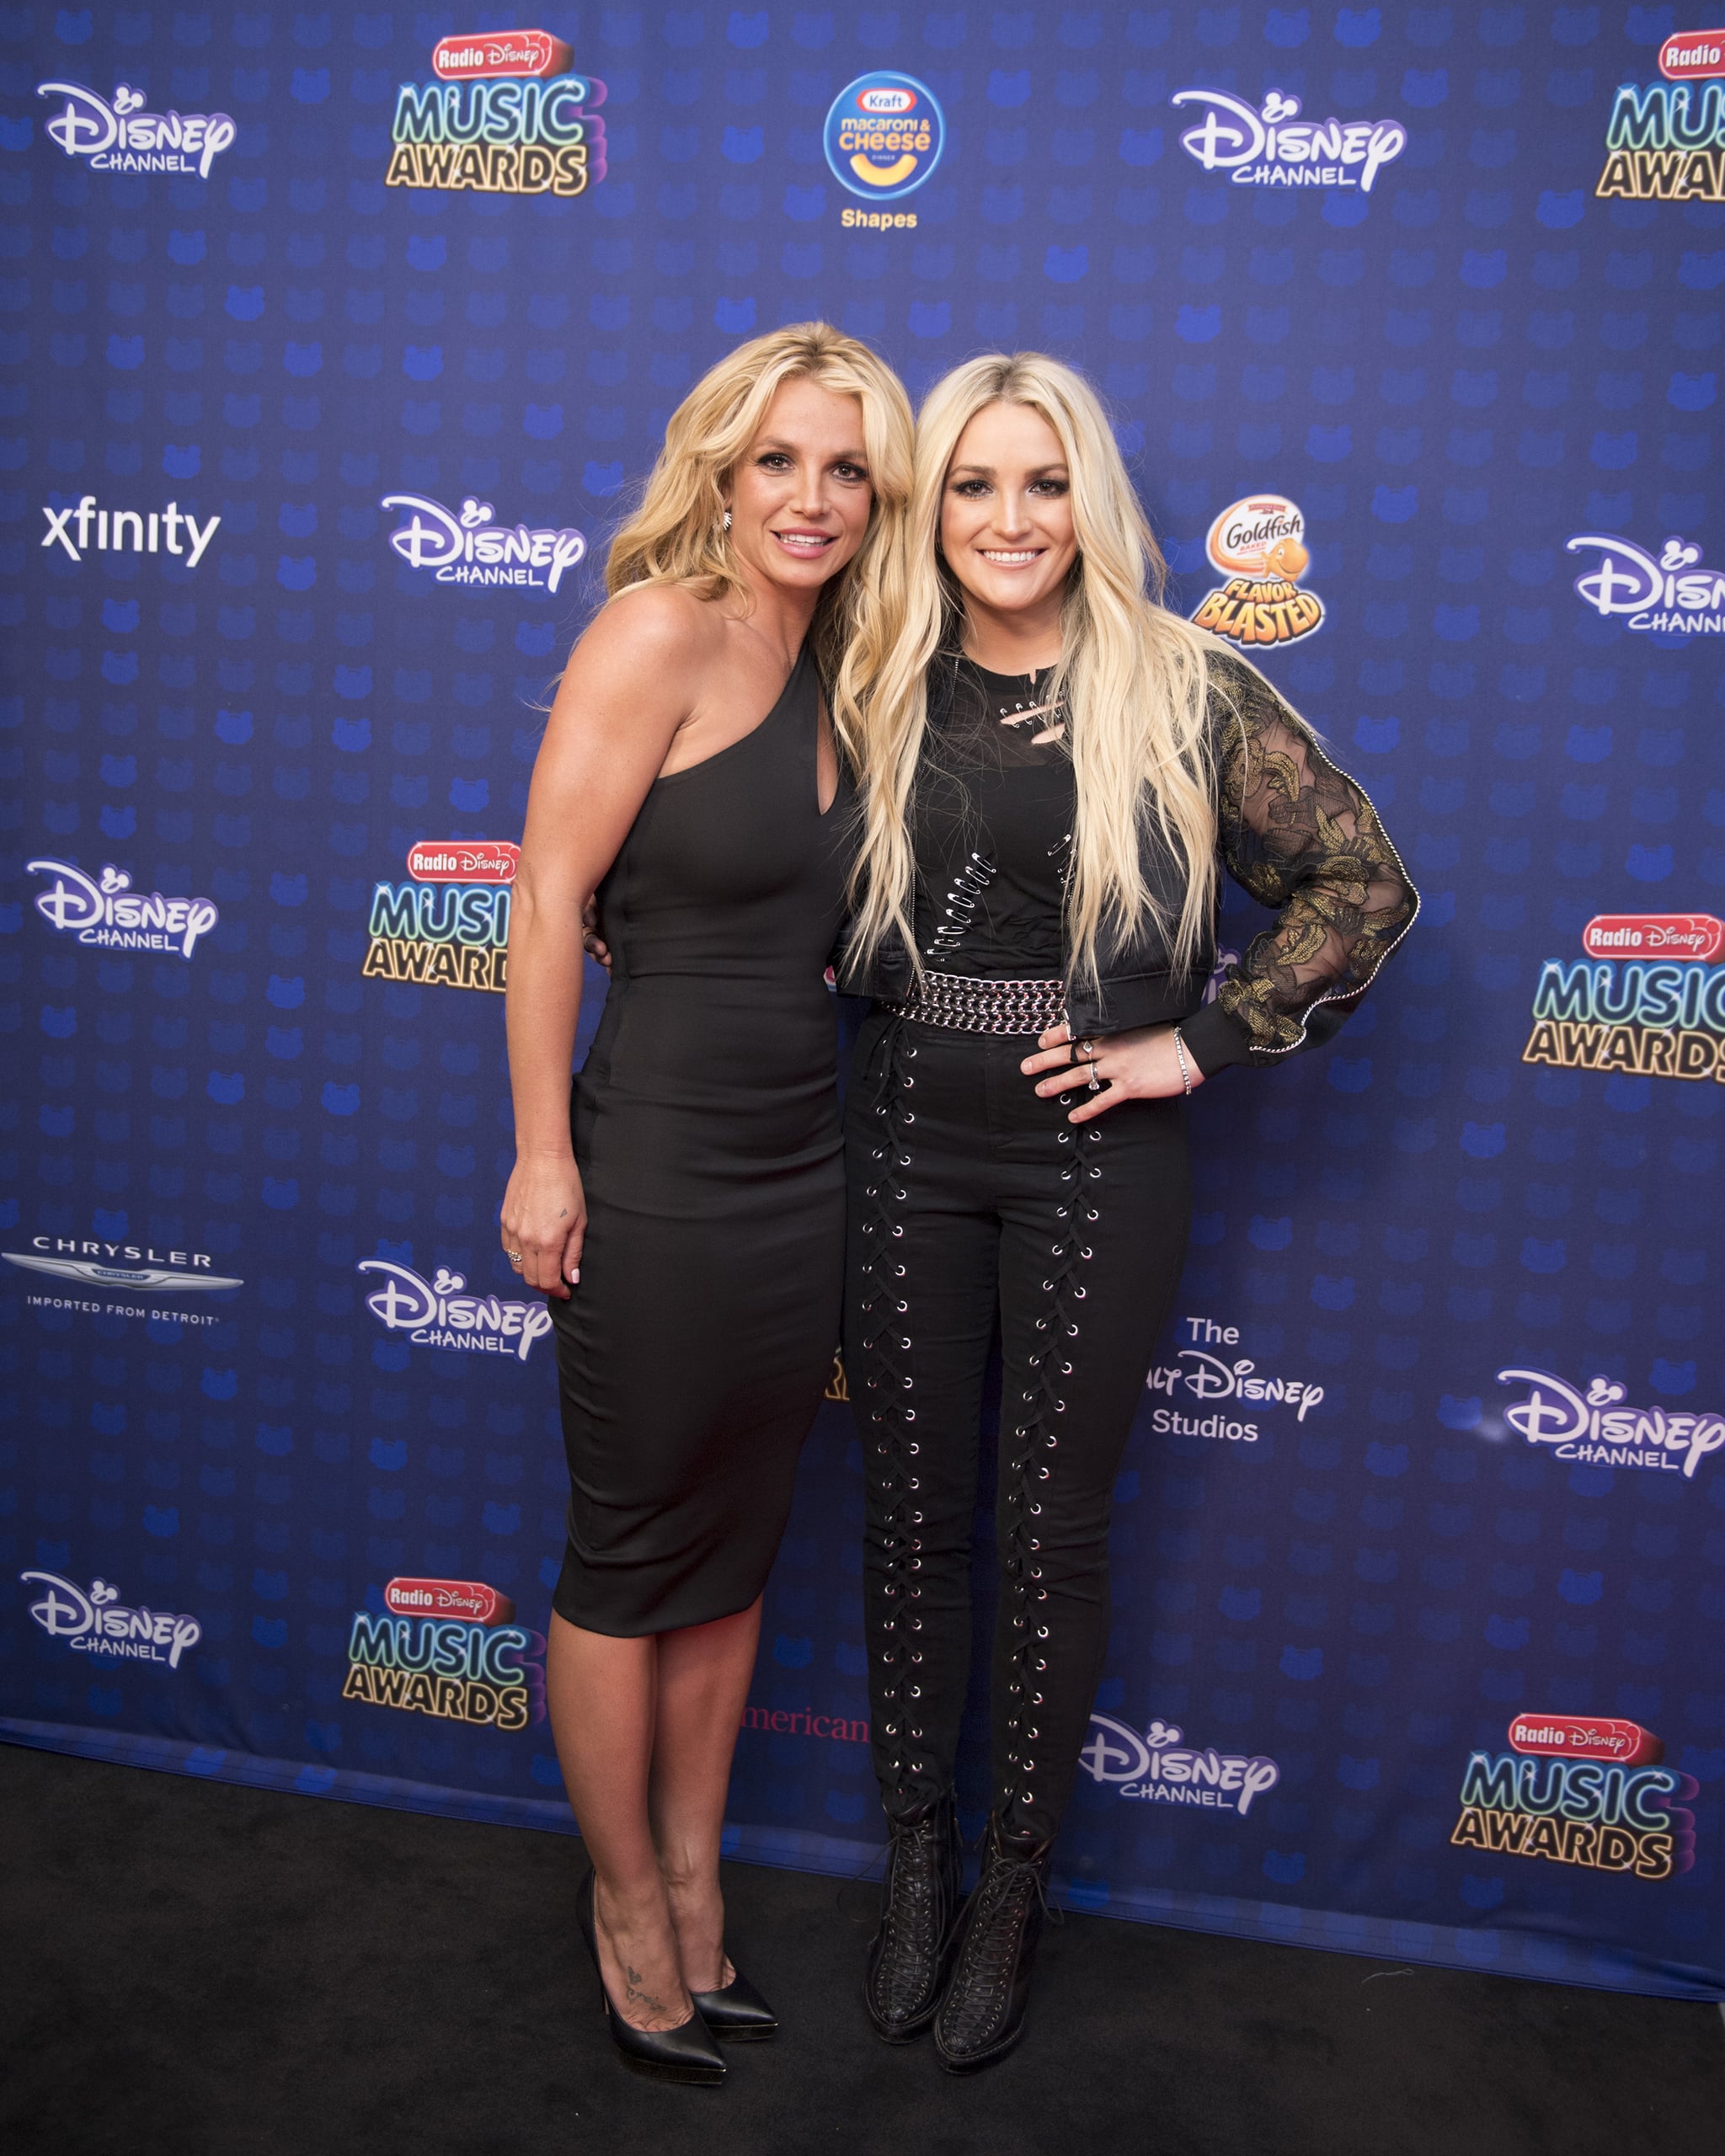 DISNEY CHANNEL PRESENTS THE 2017 RADIO DISNEY MUSIC AWARDS - Entertainment's brightest young stars turned out for the 2017 Radio Disney Music Awards (RDMA), music's biggest event for families, at Microsoft Theatre in Los Angeles on Saturday, April 29. 